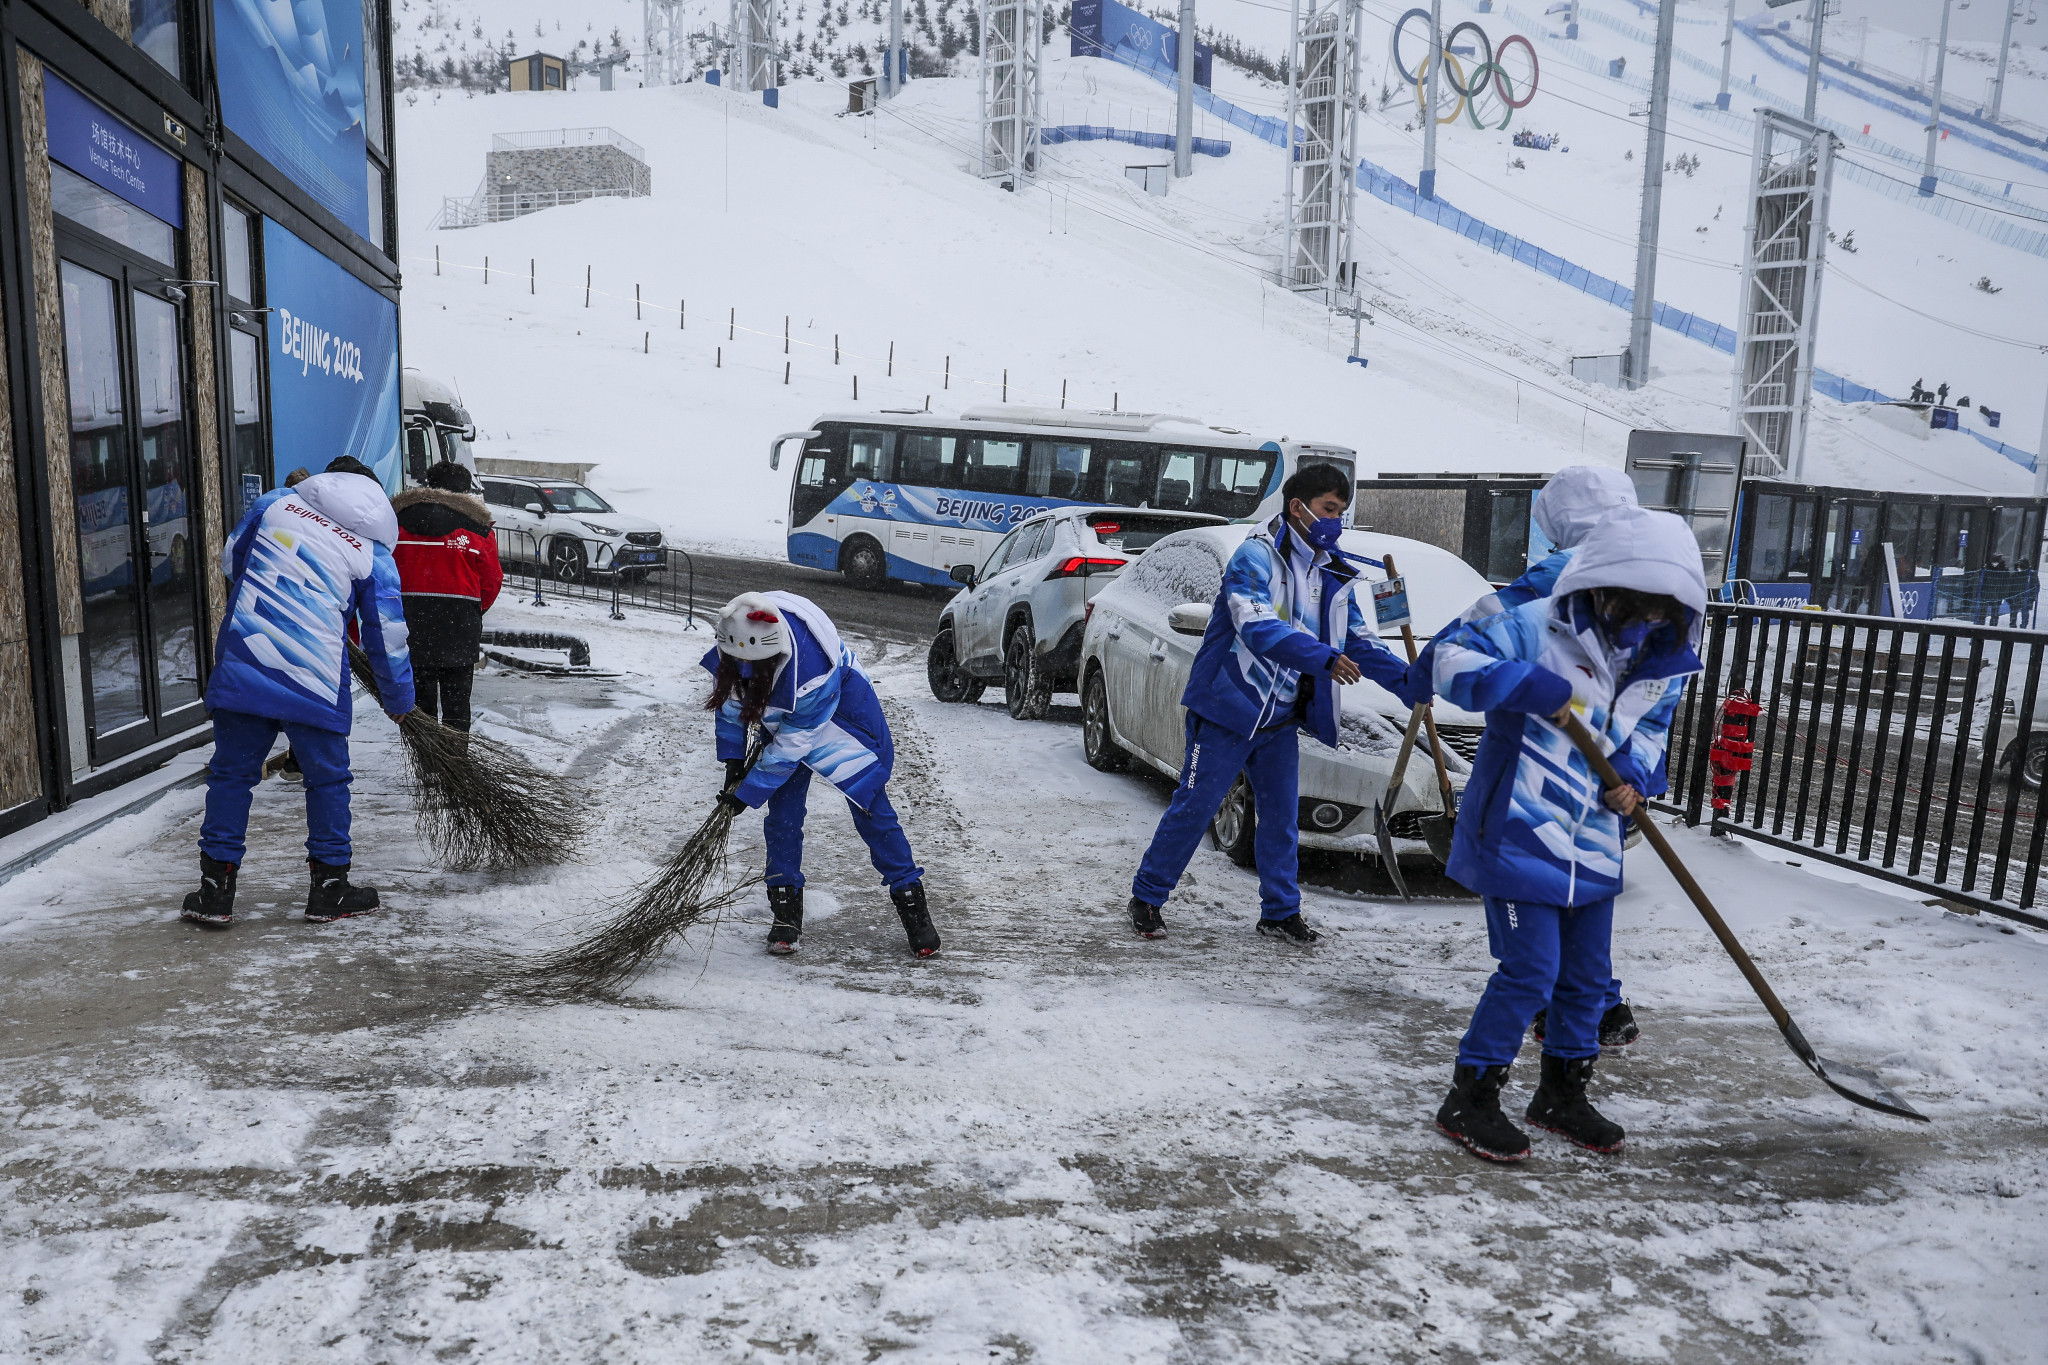 Volunteers helping to clear snow at the Games venue © Getty Images